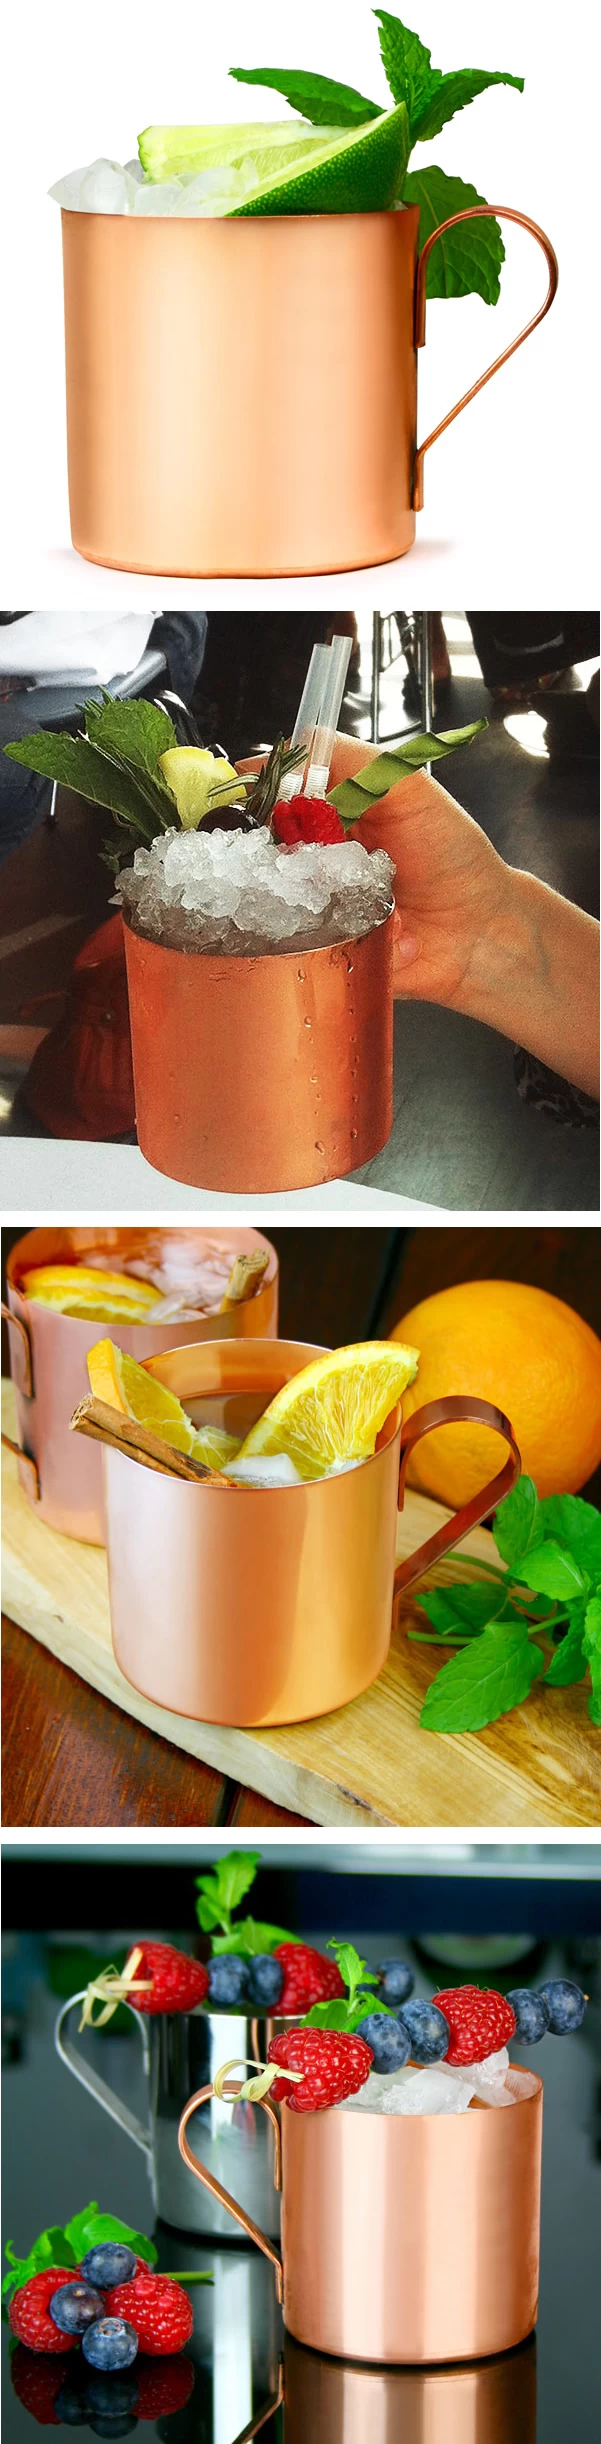 Stainless Steel Moscow Mule Cup